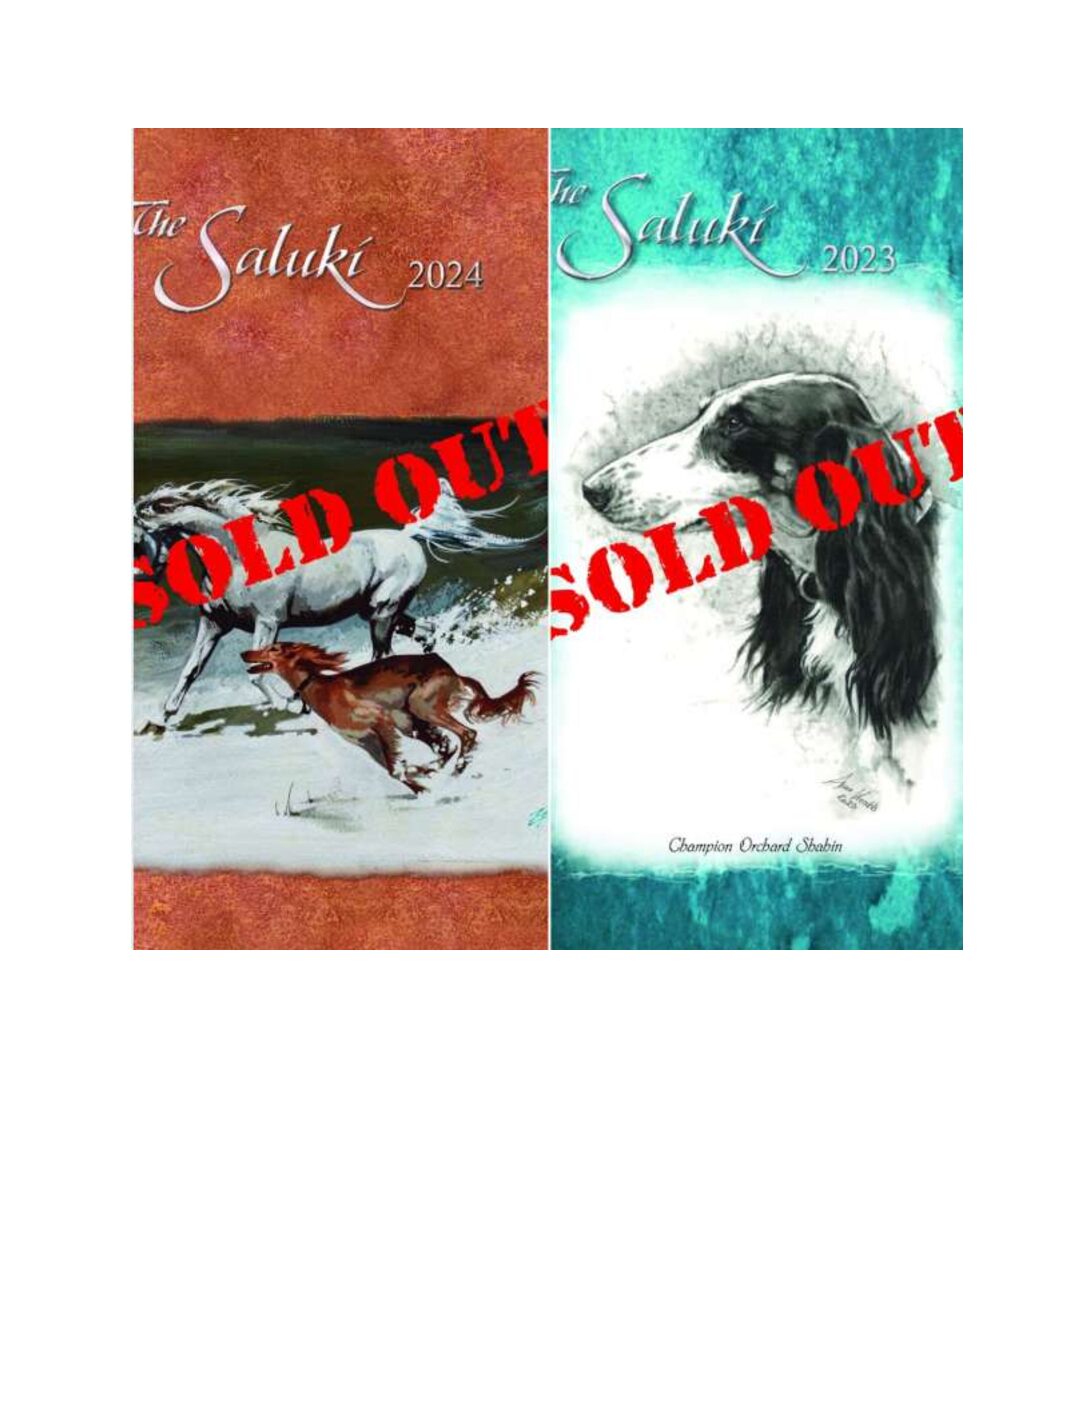 The Saluki spring magazine sold out